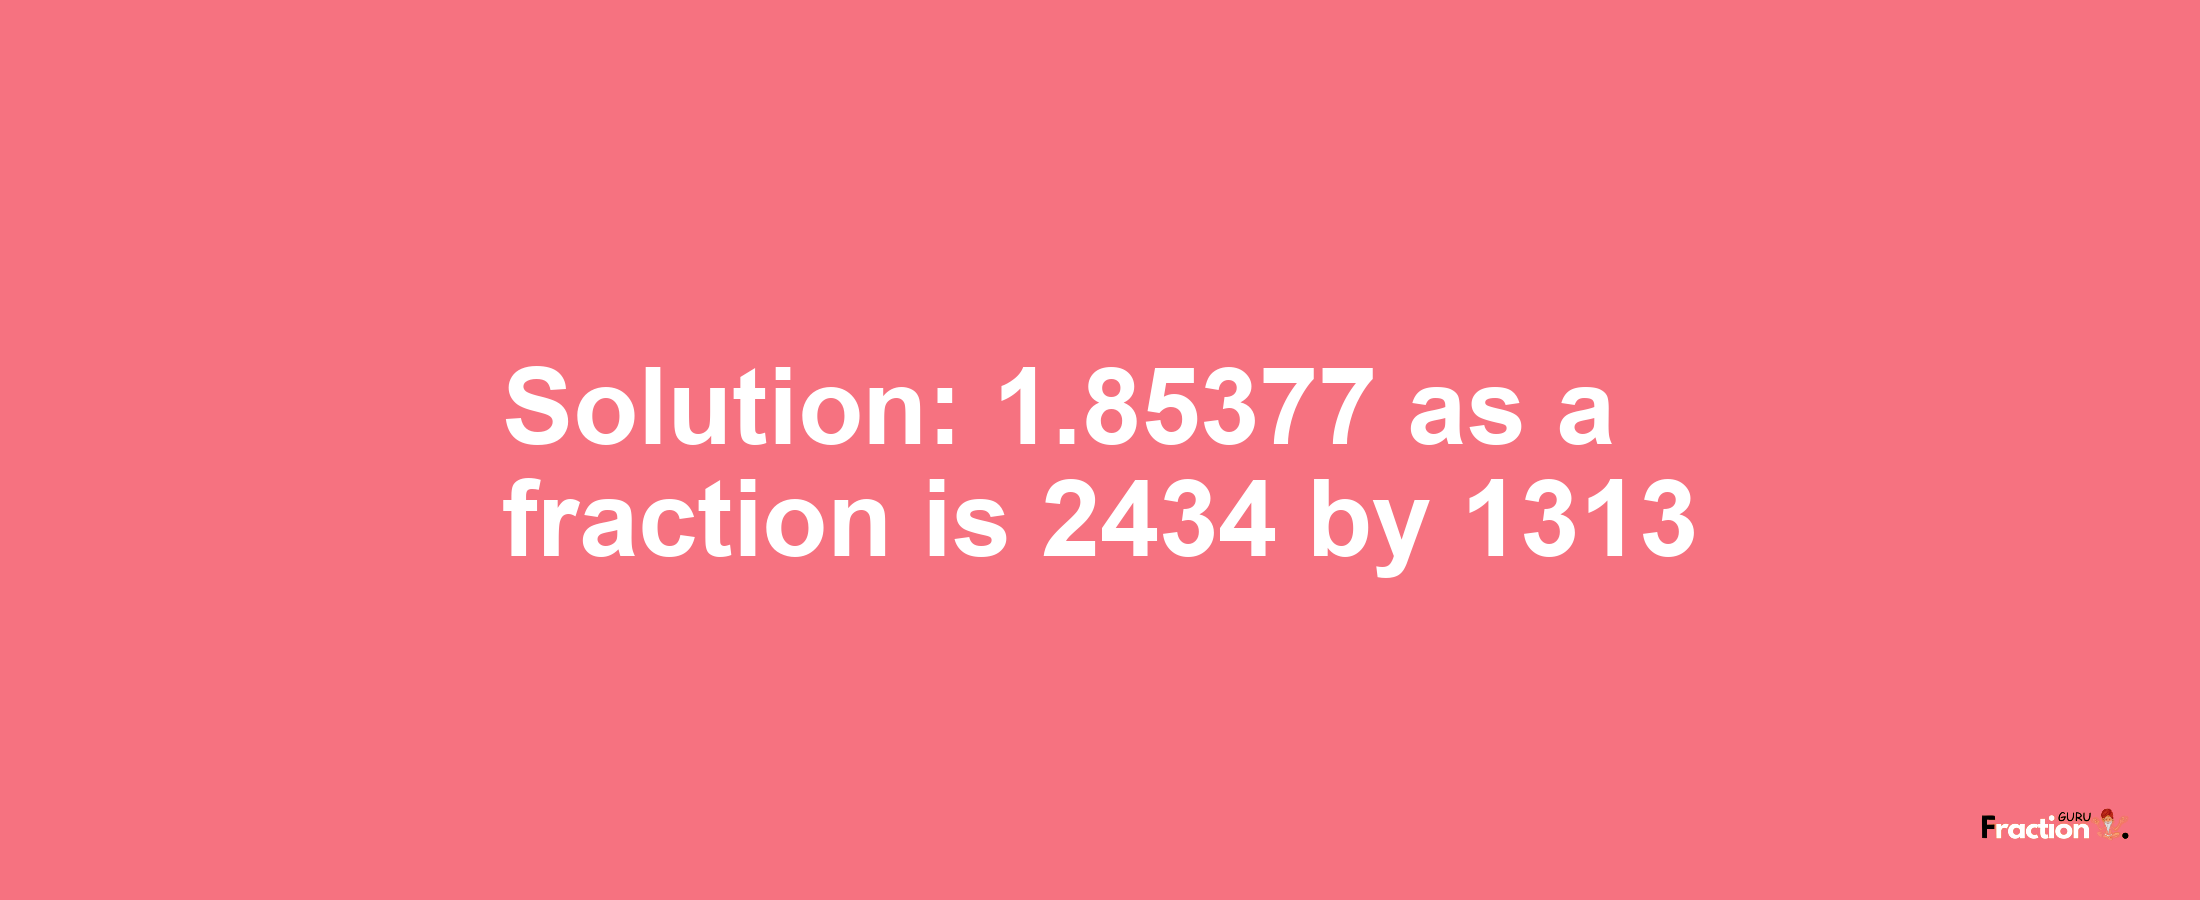 Solution:1.85377 as a fraction is 2434/1313